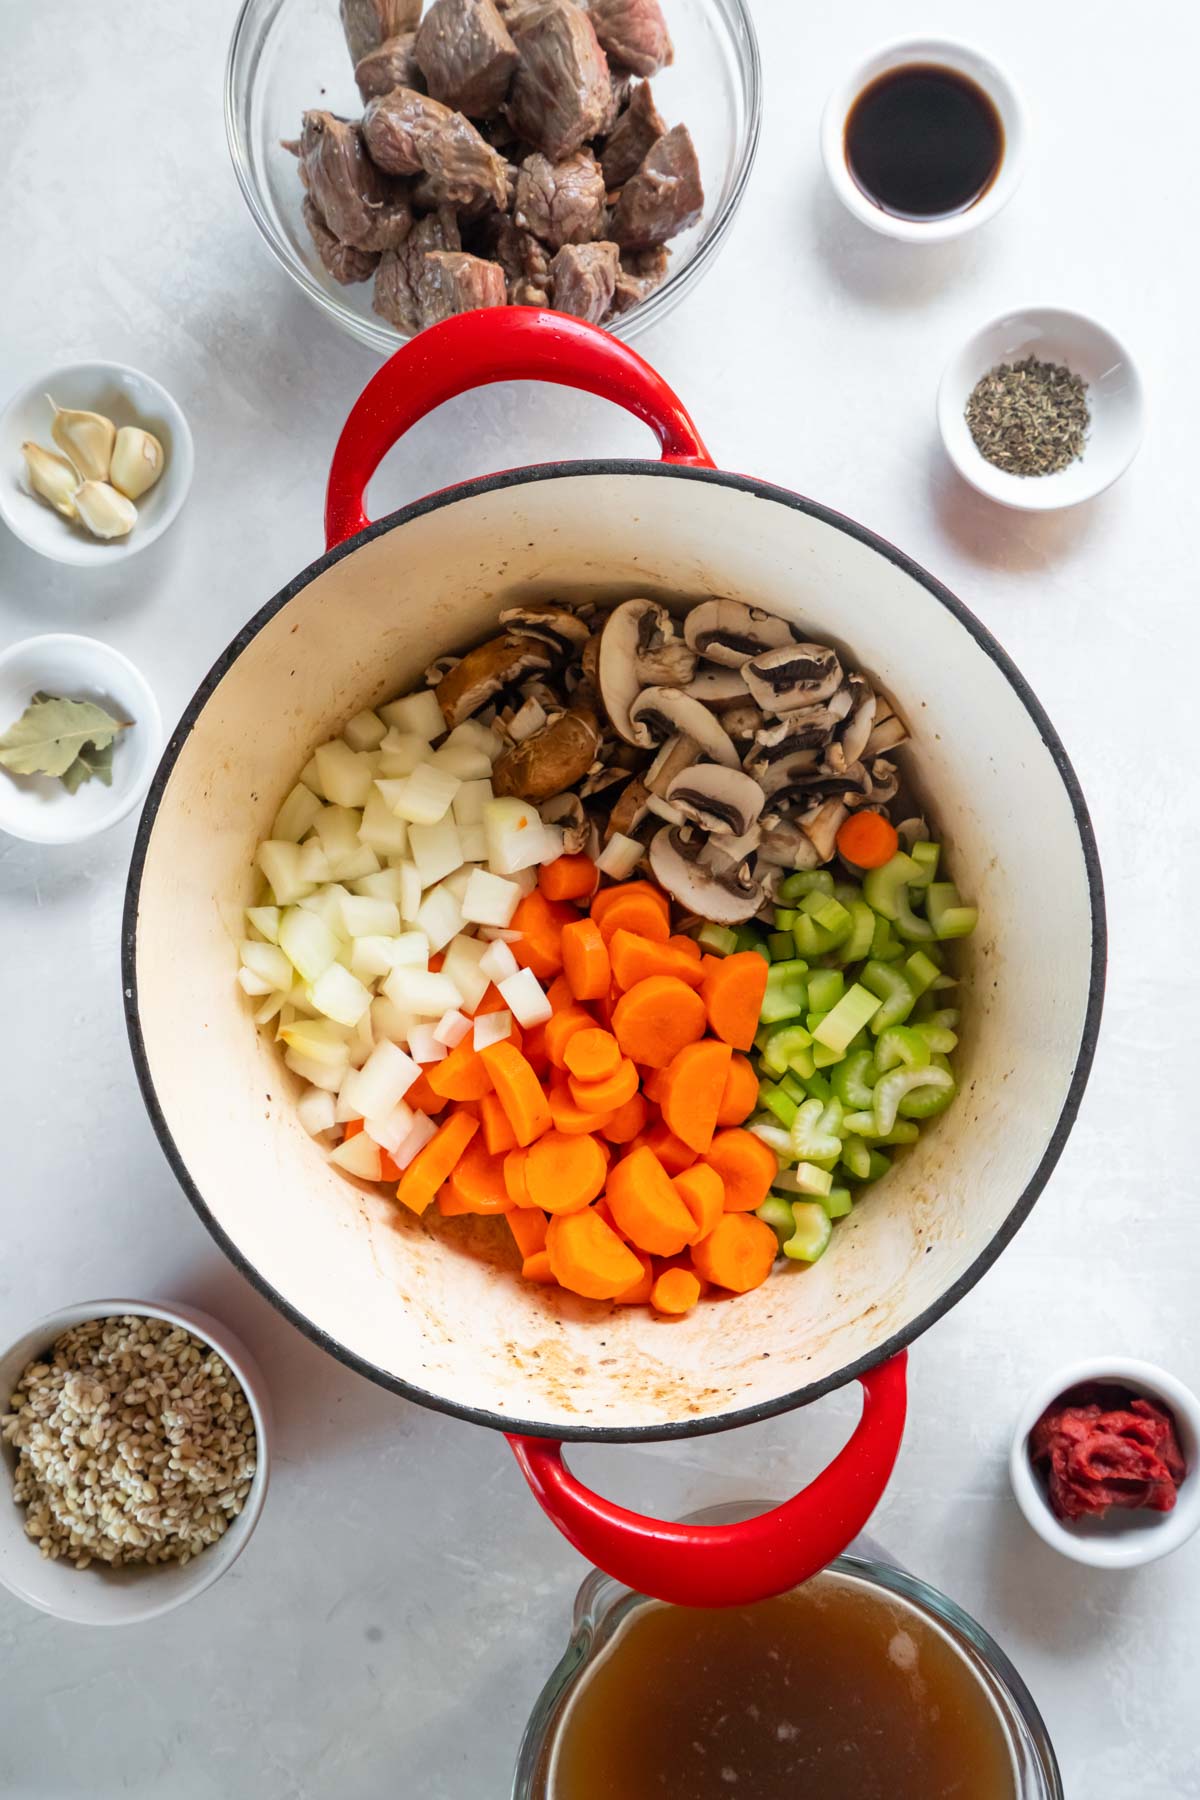 Chopped onion, mushrooms, celery and carrots in pot.